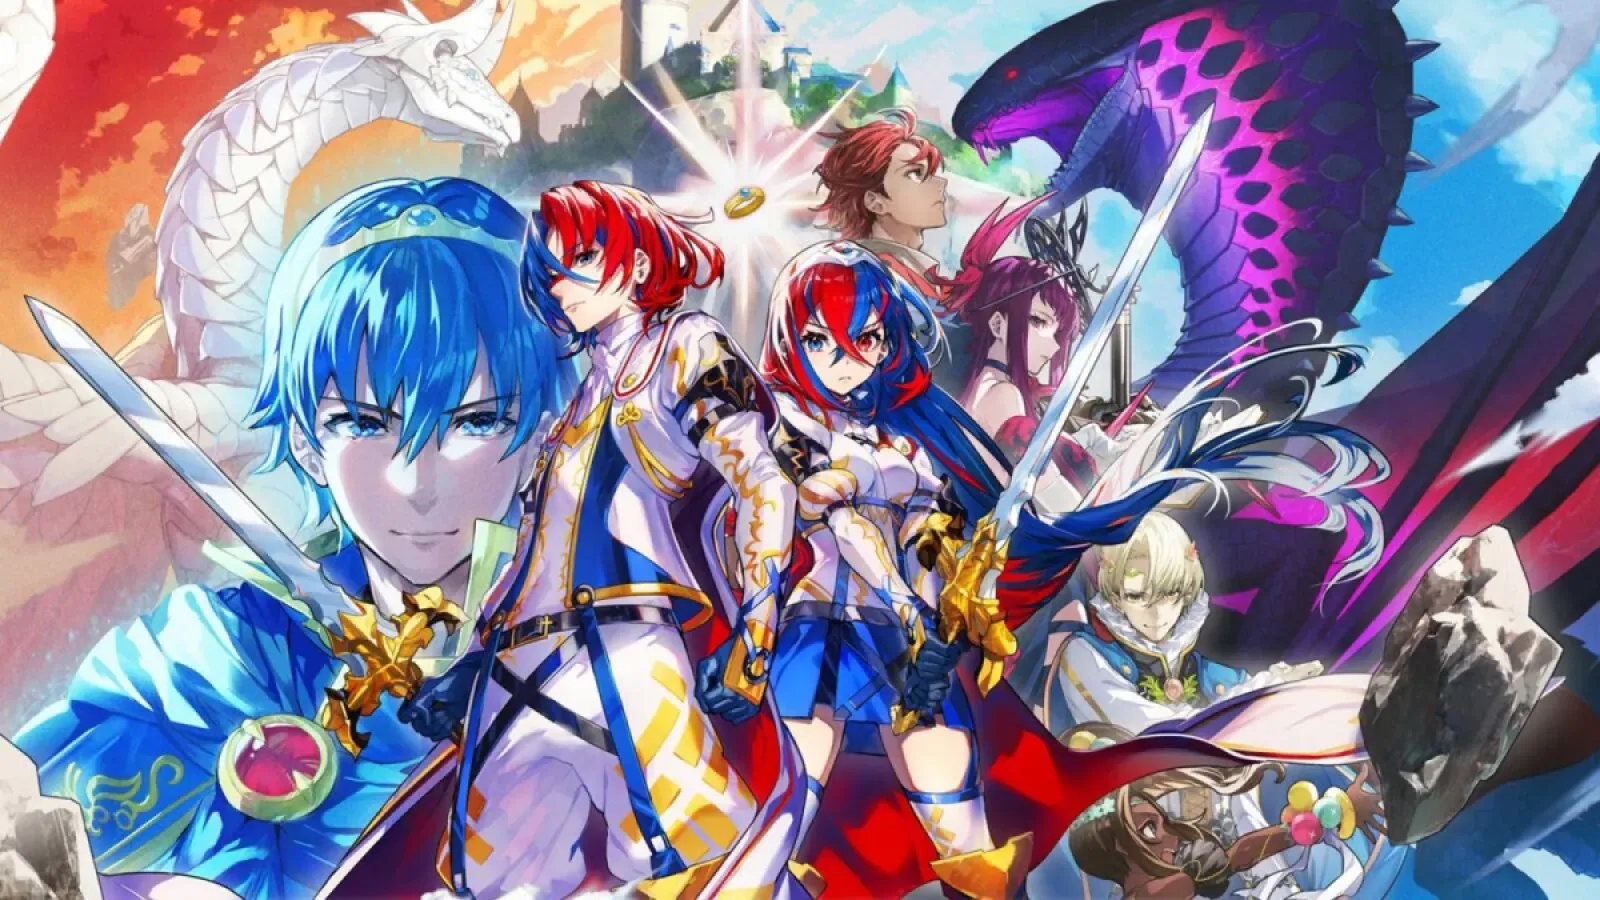 Official game graphics for Fire Emblem Engage featuring characters from the video game